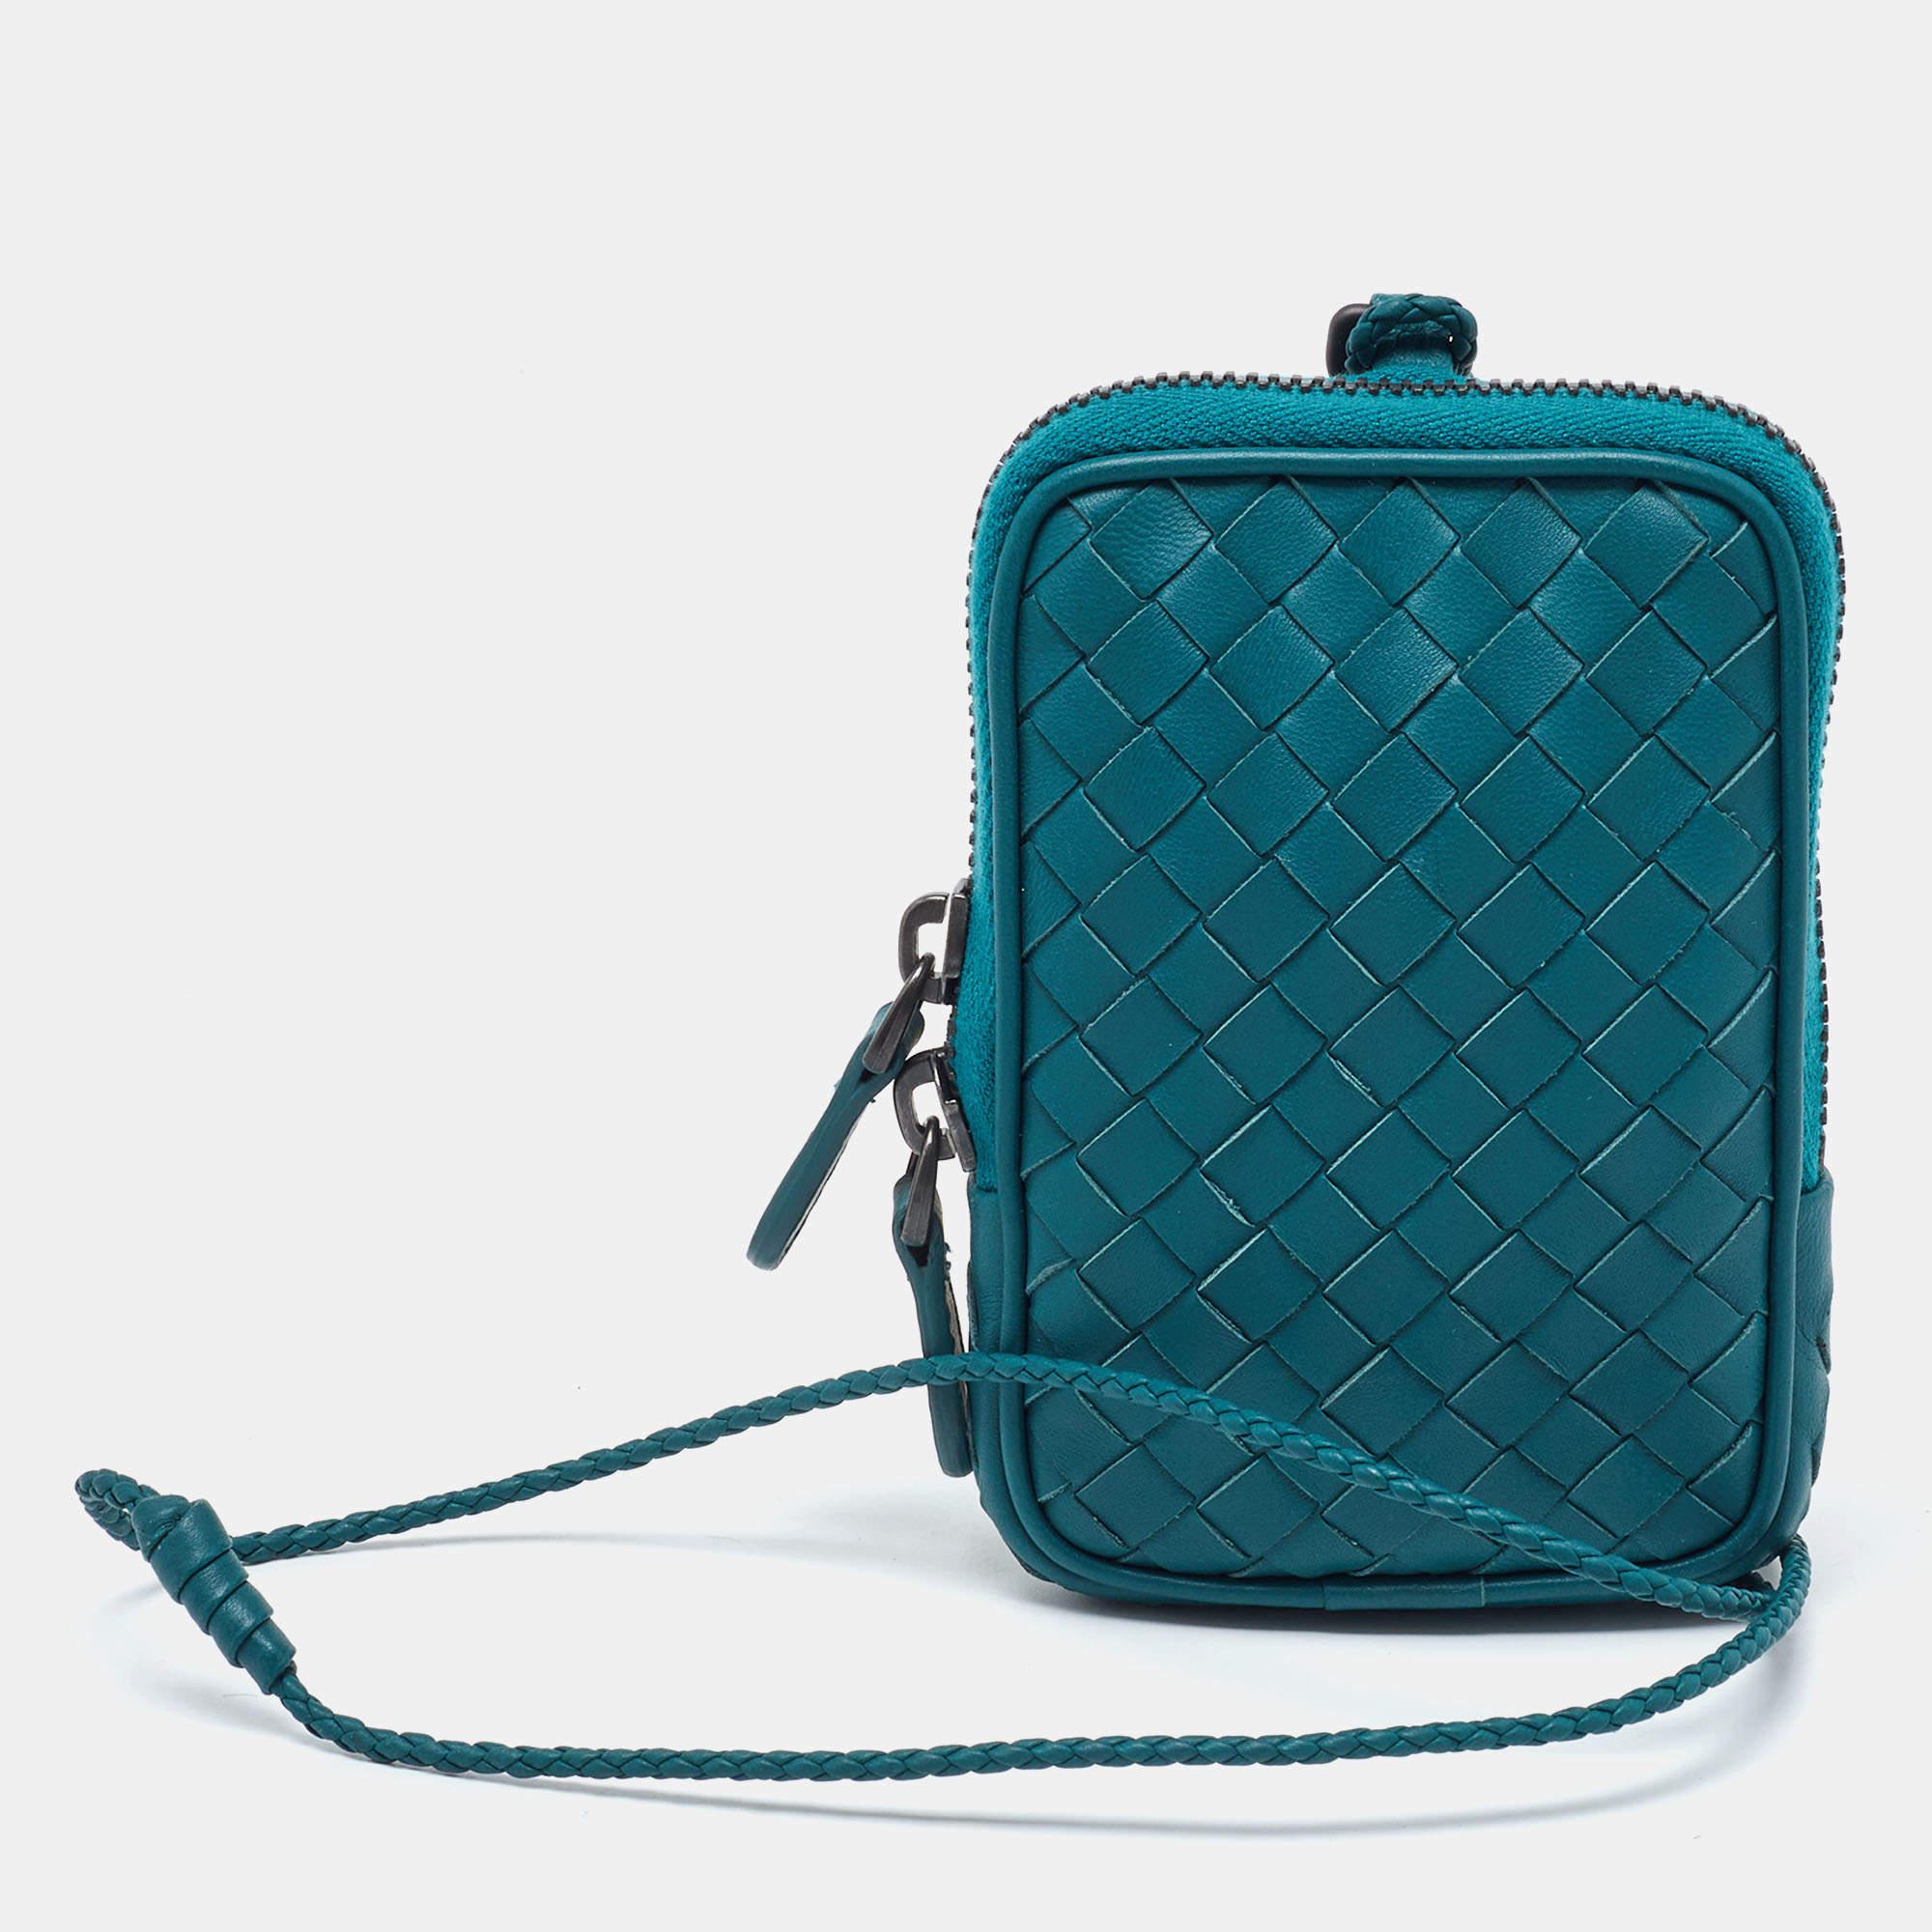 The Bottega Veneta pouch is a luxurious accessory crafted from high-quality green leather. It features the brand's signature woven pattern, a secure zip closure, and a spacious interior for organizing essentials. This elegant pouch exudes